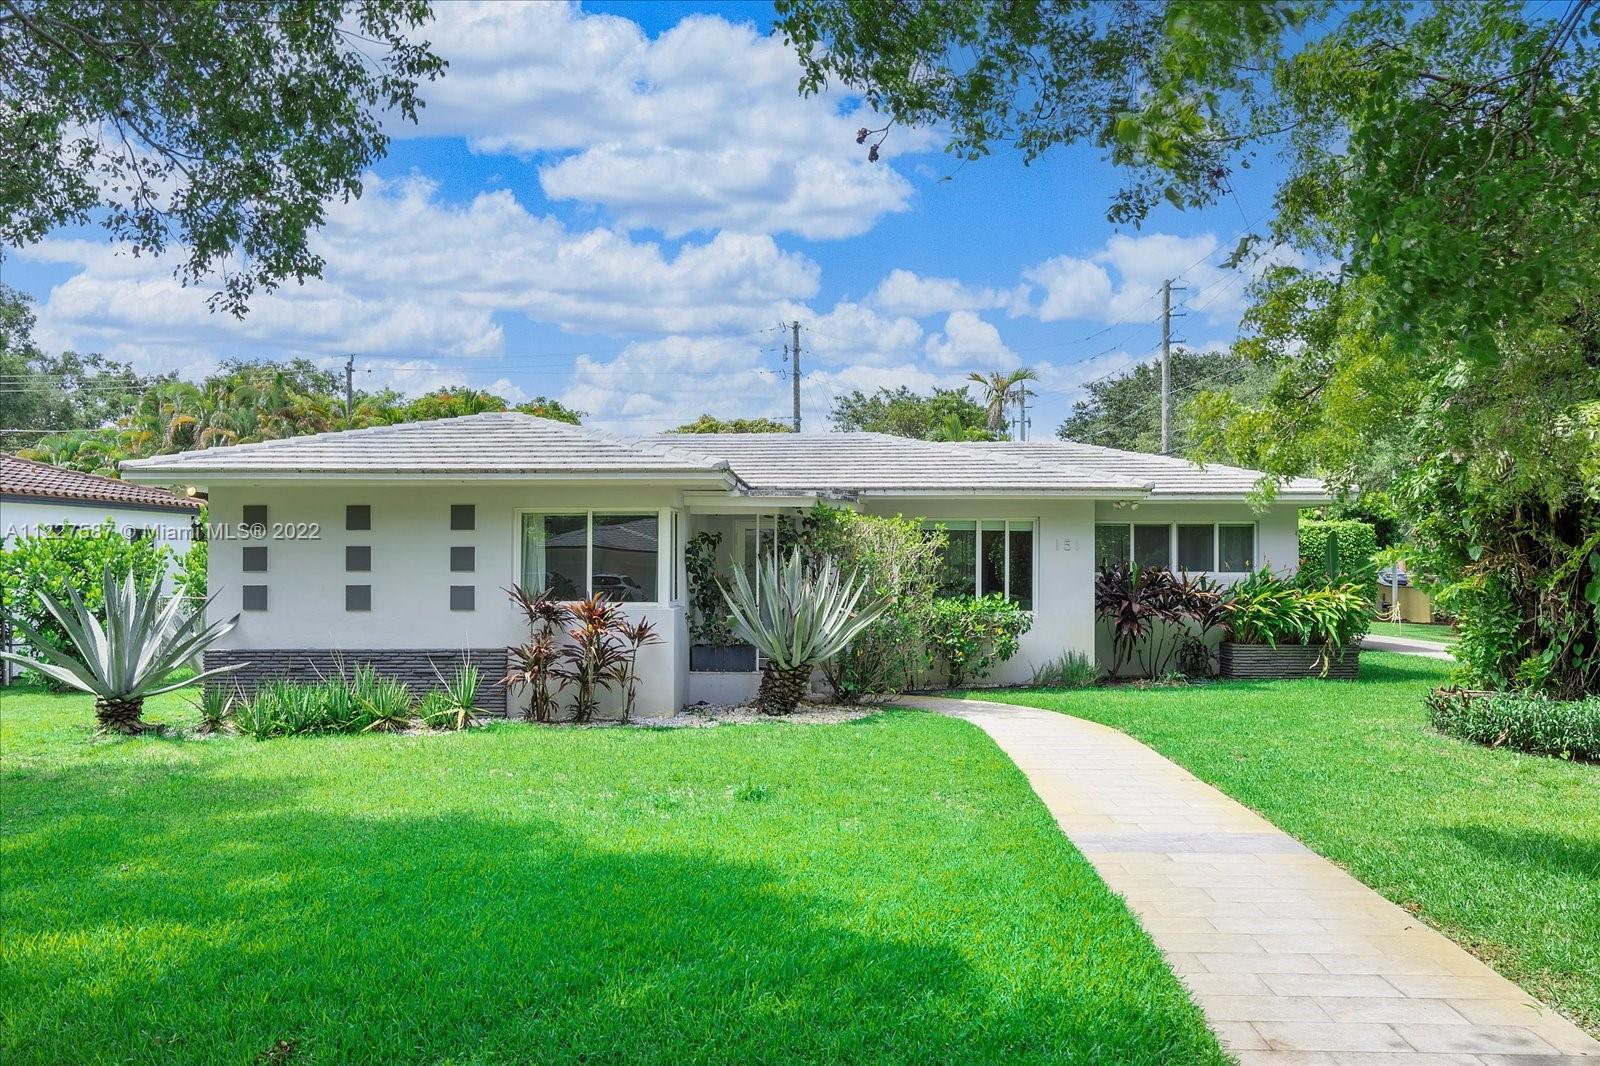 Spectacular mid-century modern pool home in Miami Shores. This home features a split floor plan with